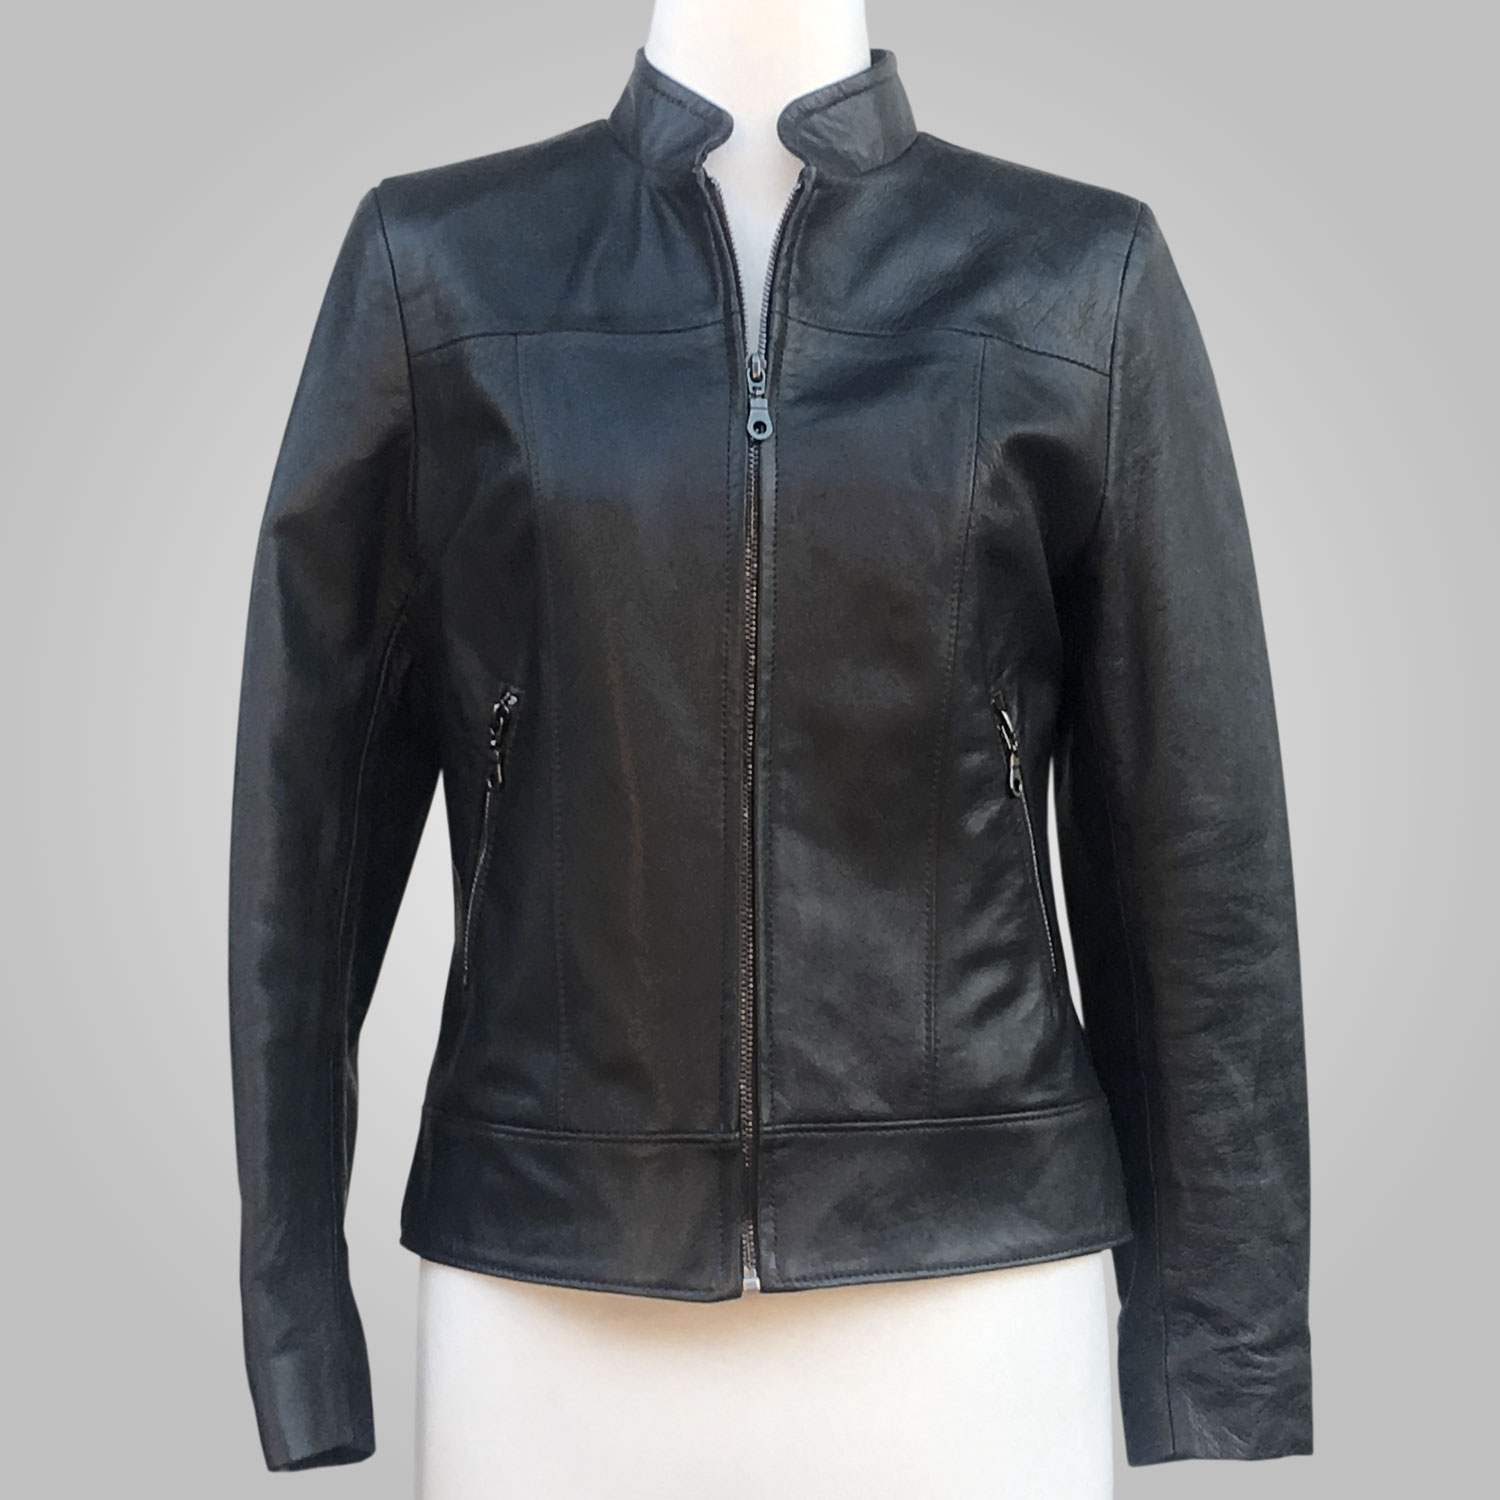 Music and Leather Jacket - L'Aurore Leather Jacket